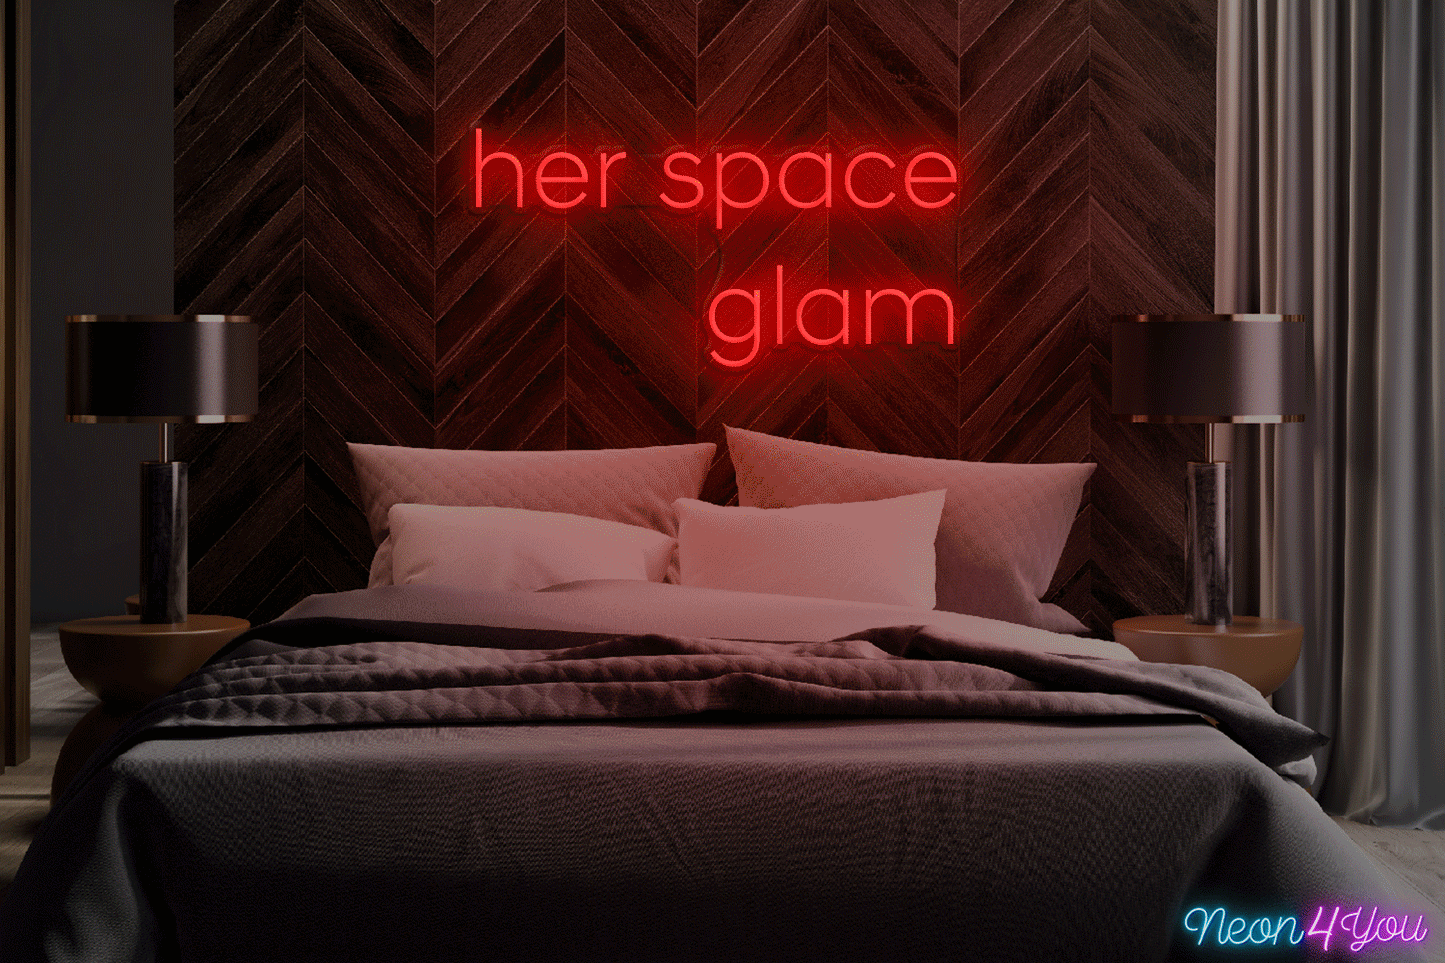 Her Space Glam - RGB - Custom Neon Sign